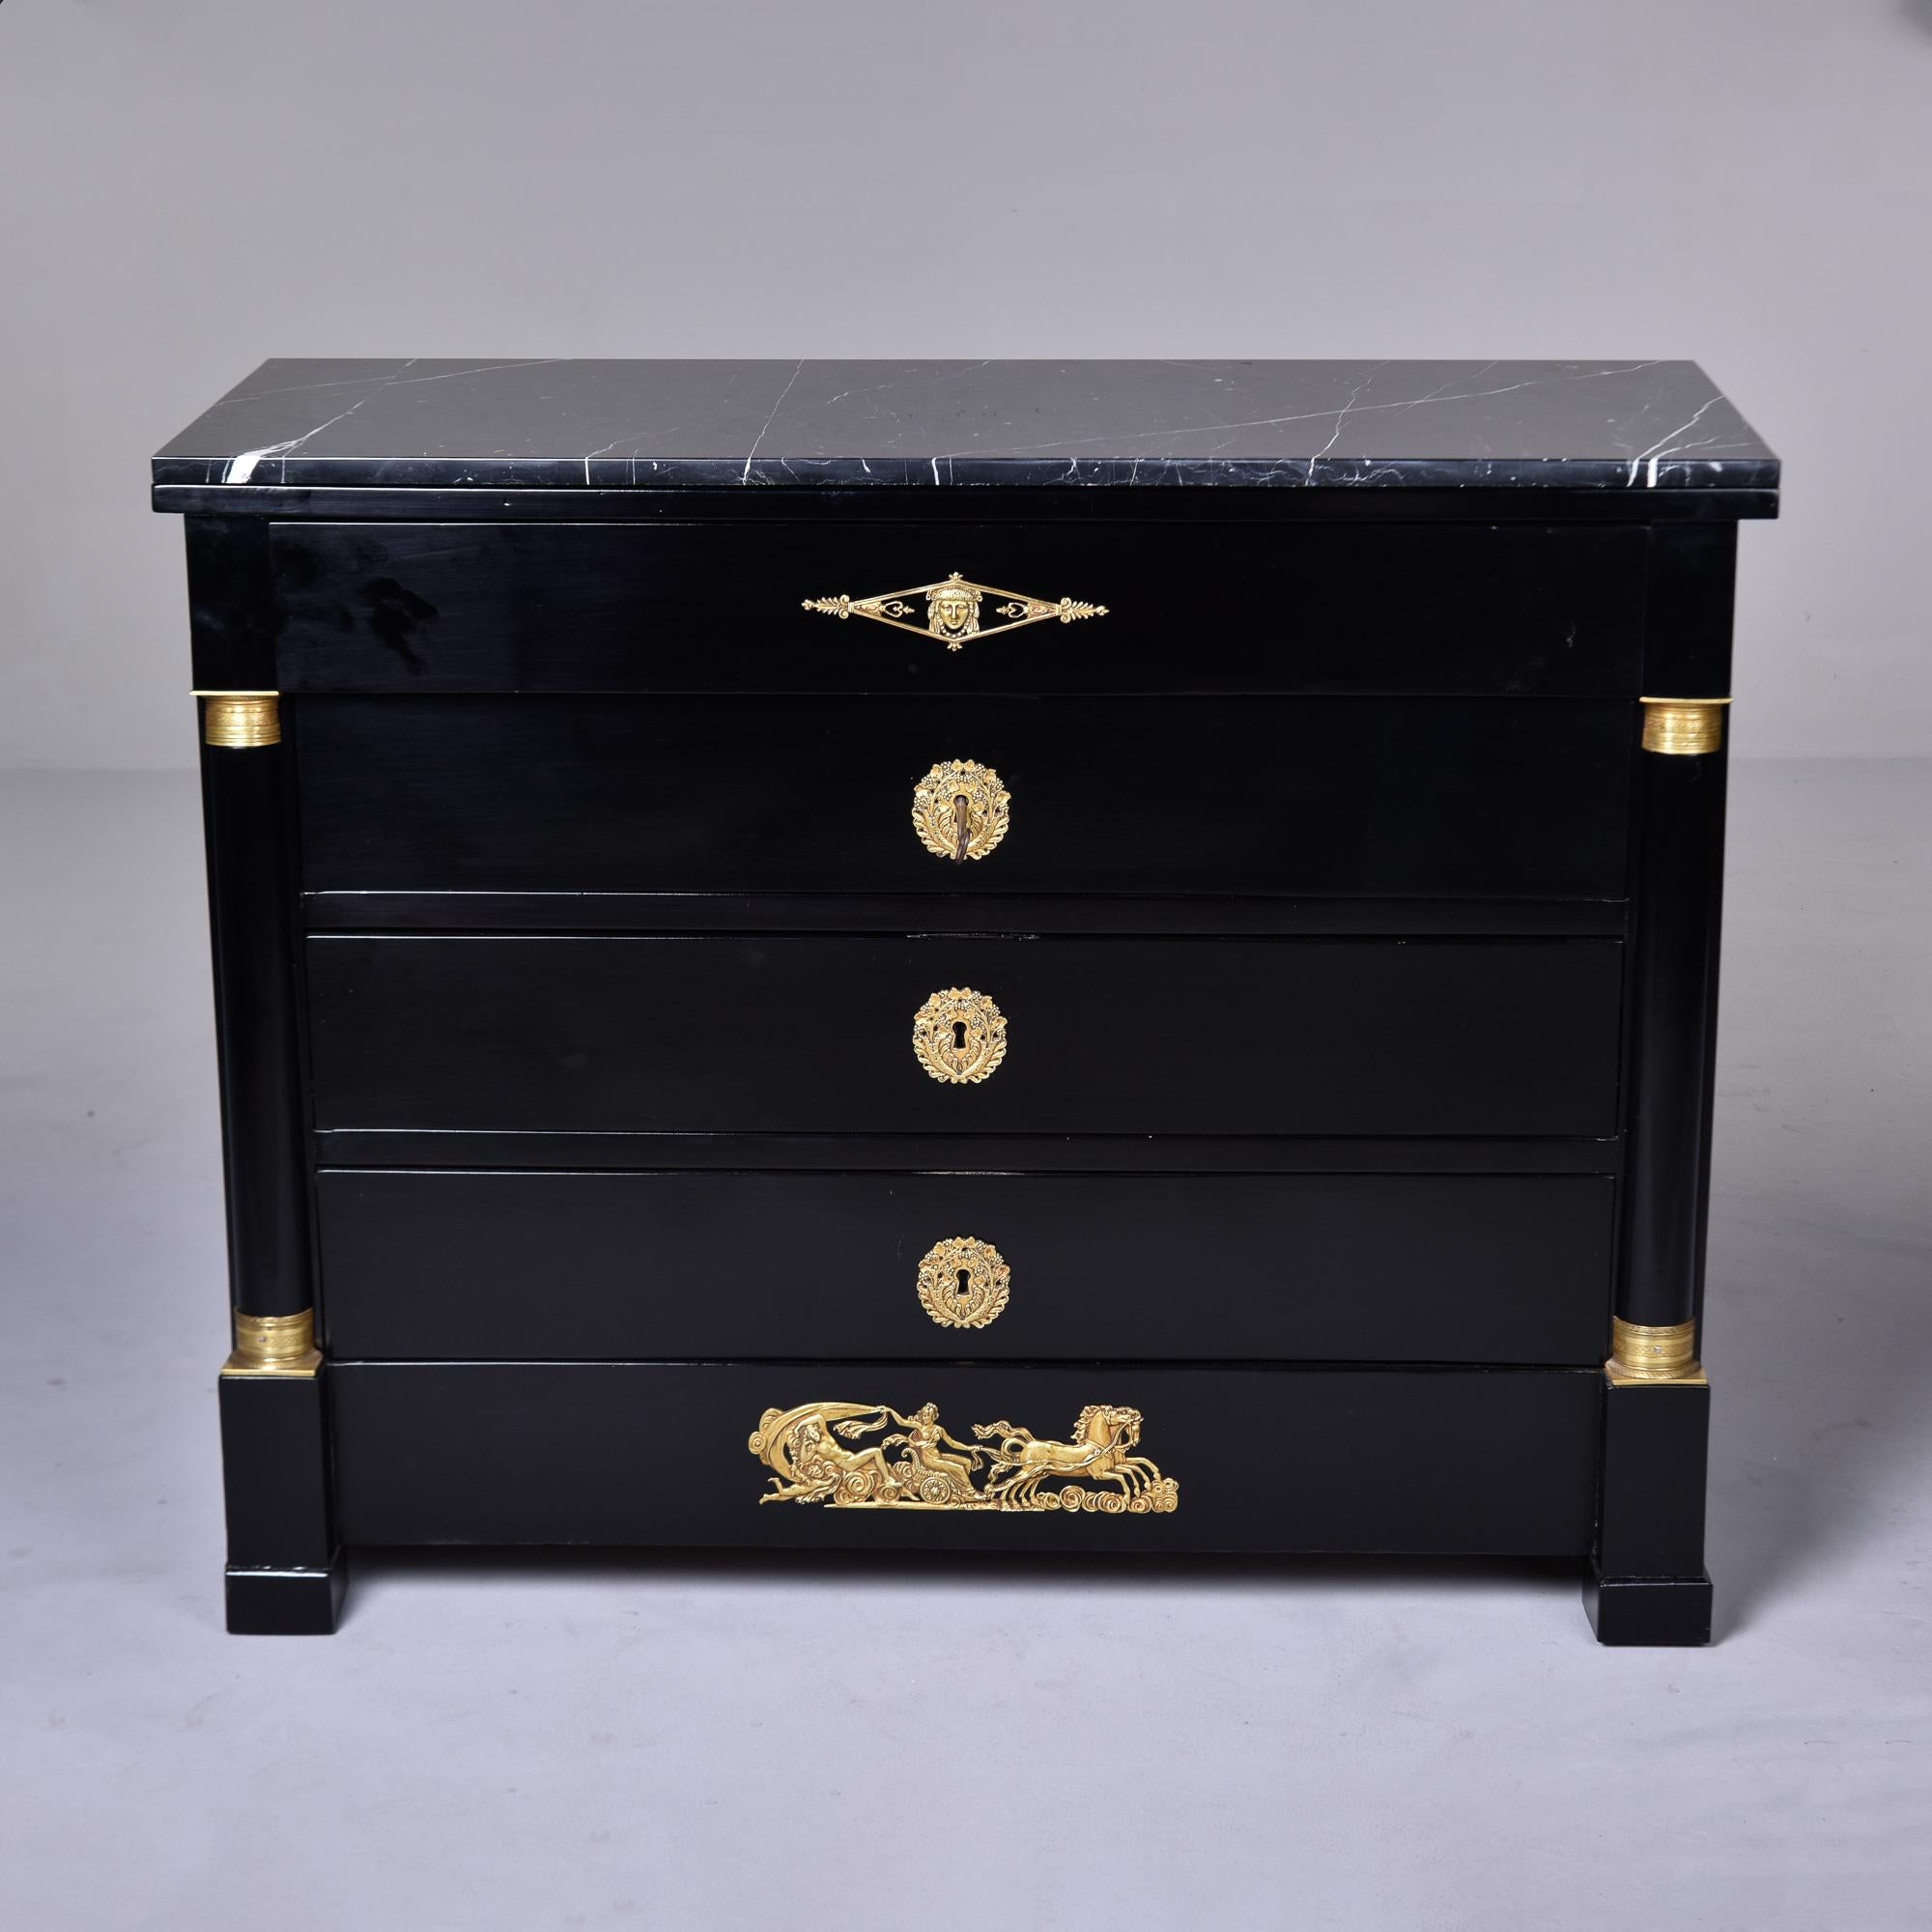 Found in France, this circa 1910 Empire style mahogany chest of four drawers has a new ebonised finish and black marble top. Decorative columns on the front sides have brass trim and all drawers have dovetail construction, and functional locks with